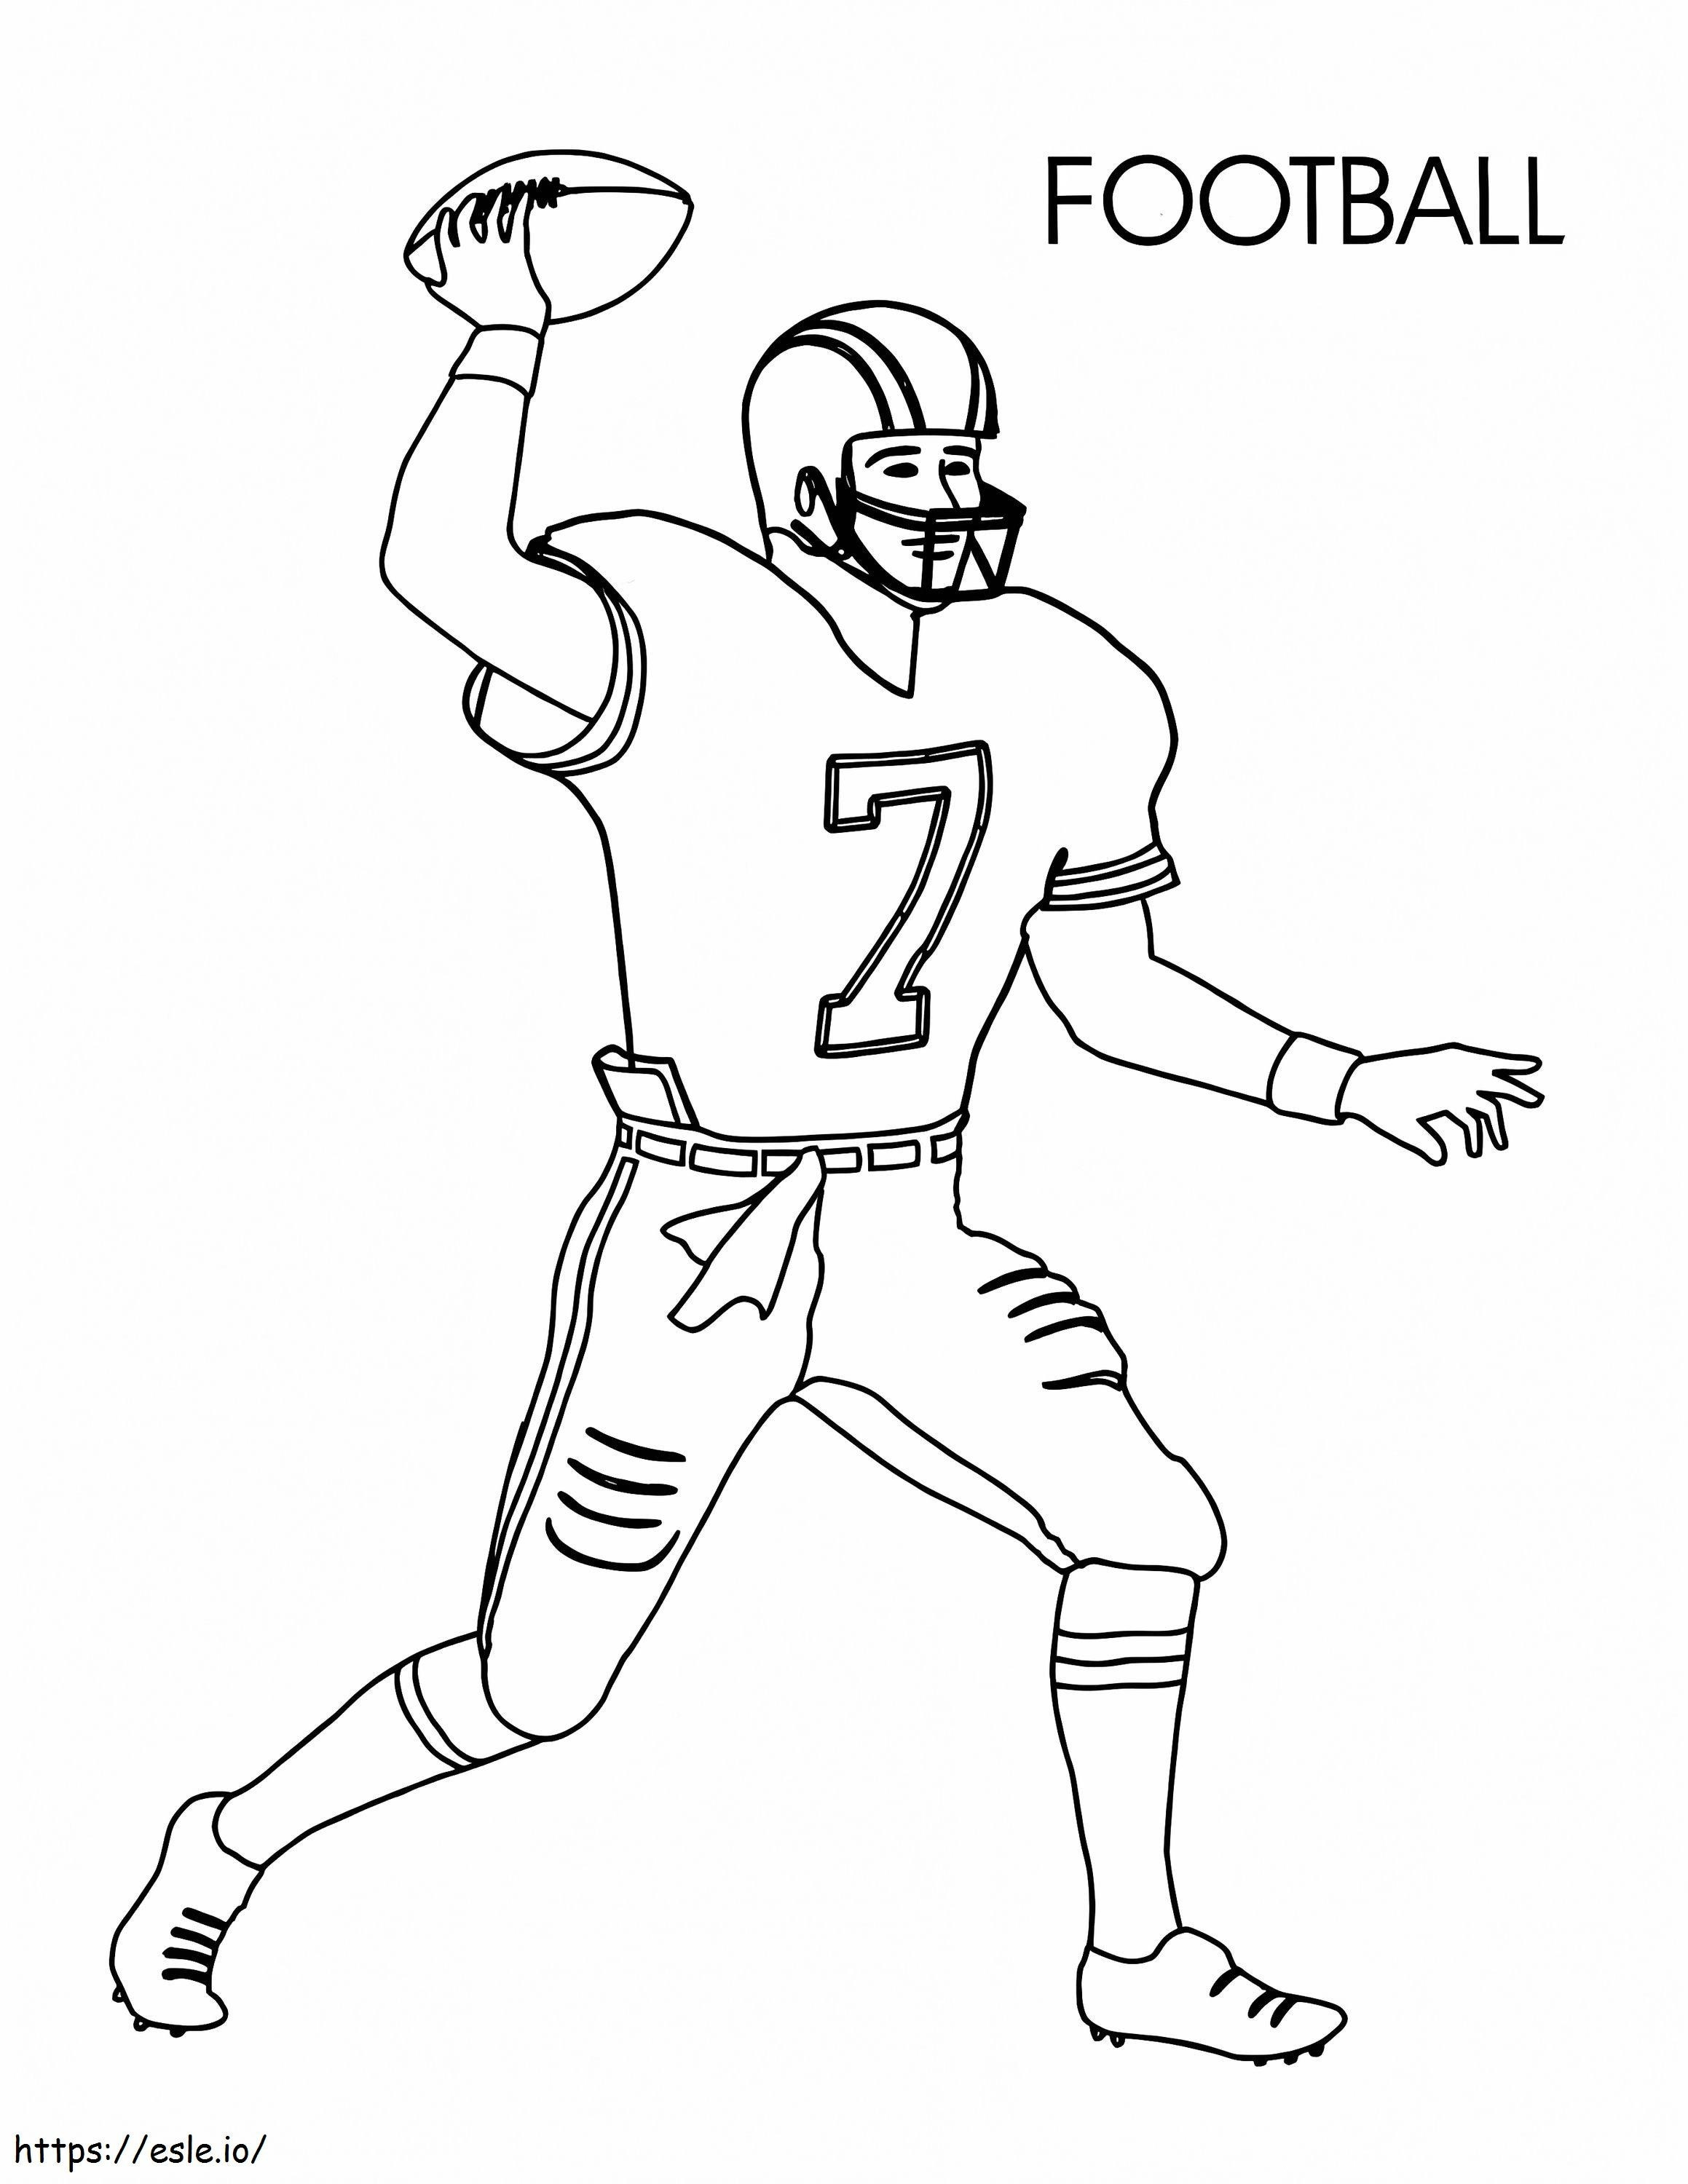 Football Player 2 coloring page